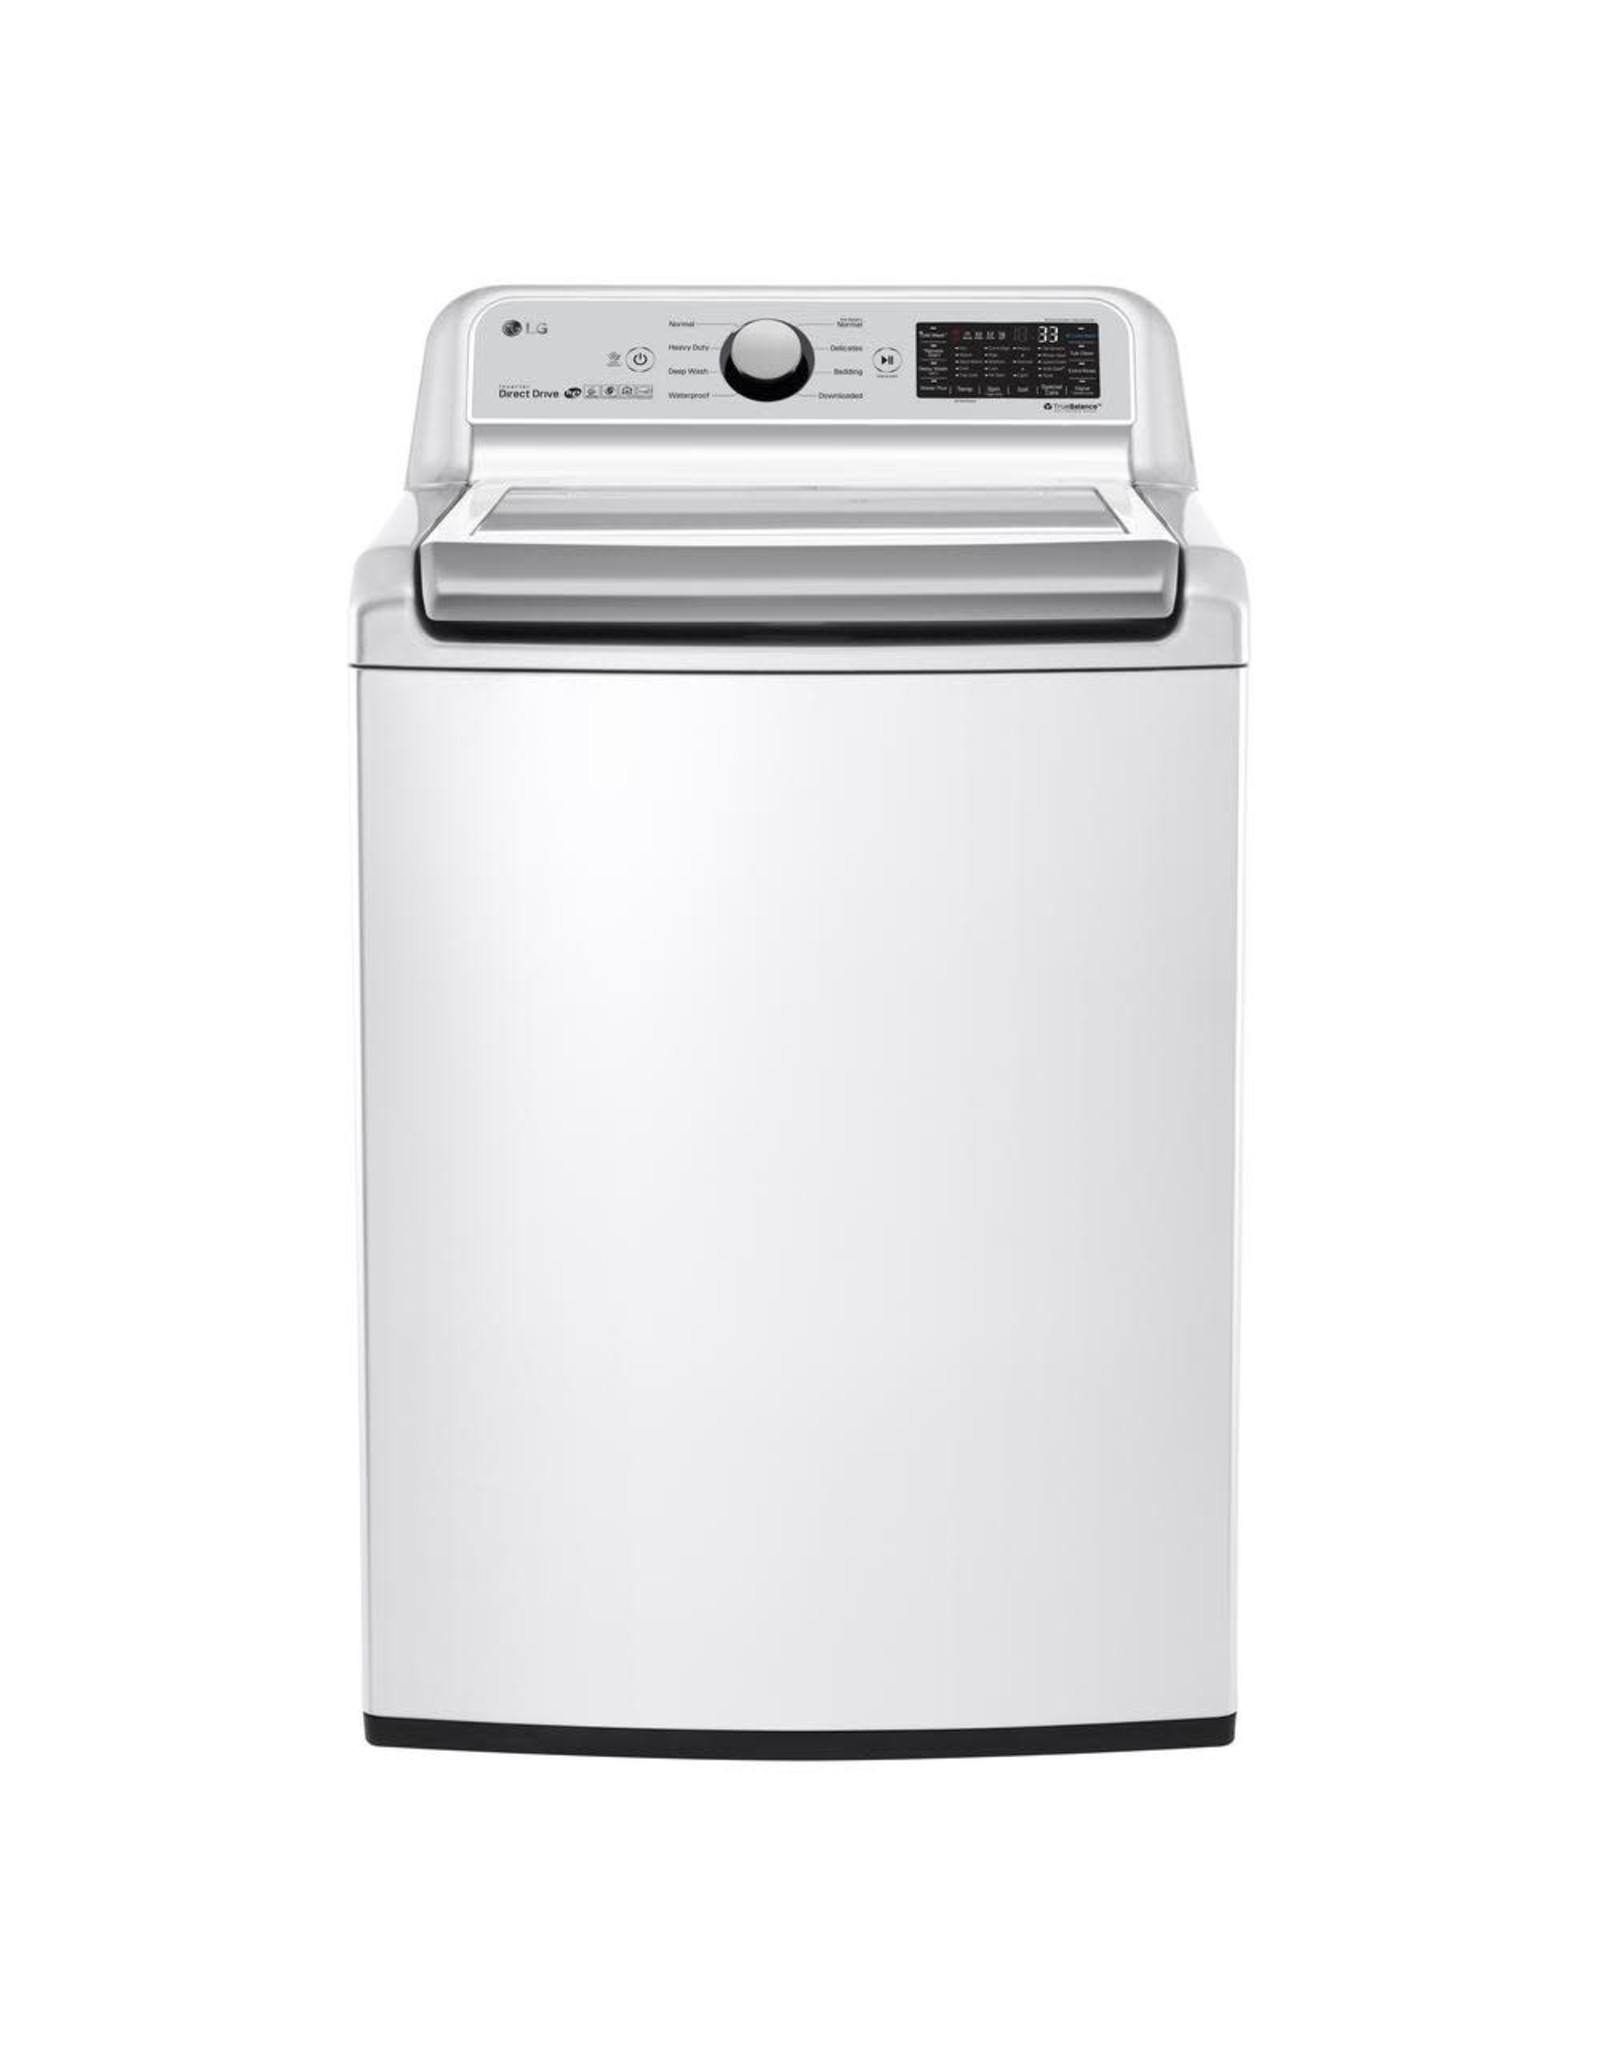 LG Electronics WT7300CW 5.0 cu. ft. High Efficiency Mega Capacity Smart Top Load Washer with TurboWash3D and Wi-Fi Enabled in White, ENERGY STAR